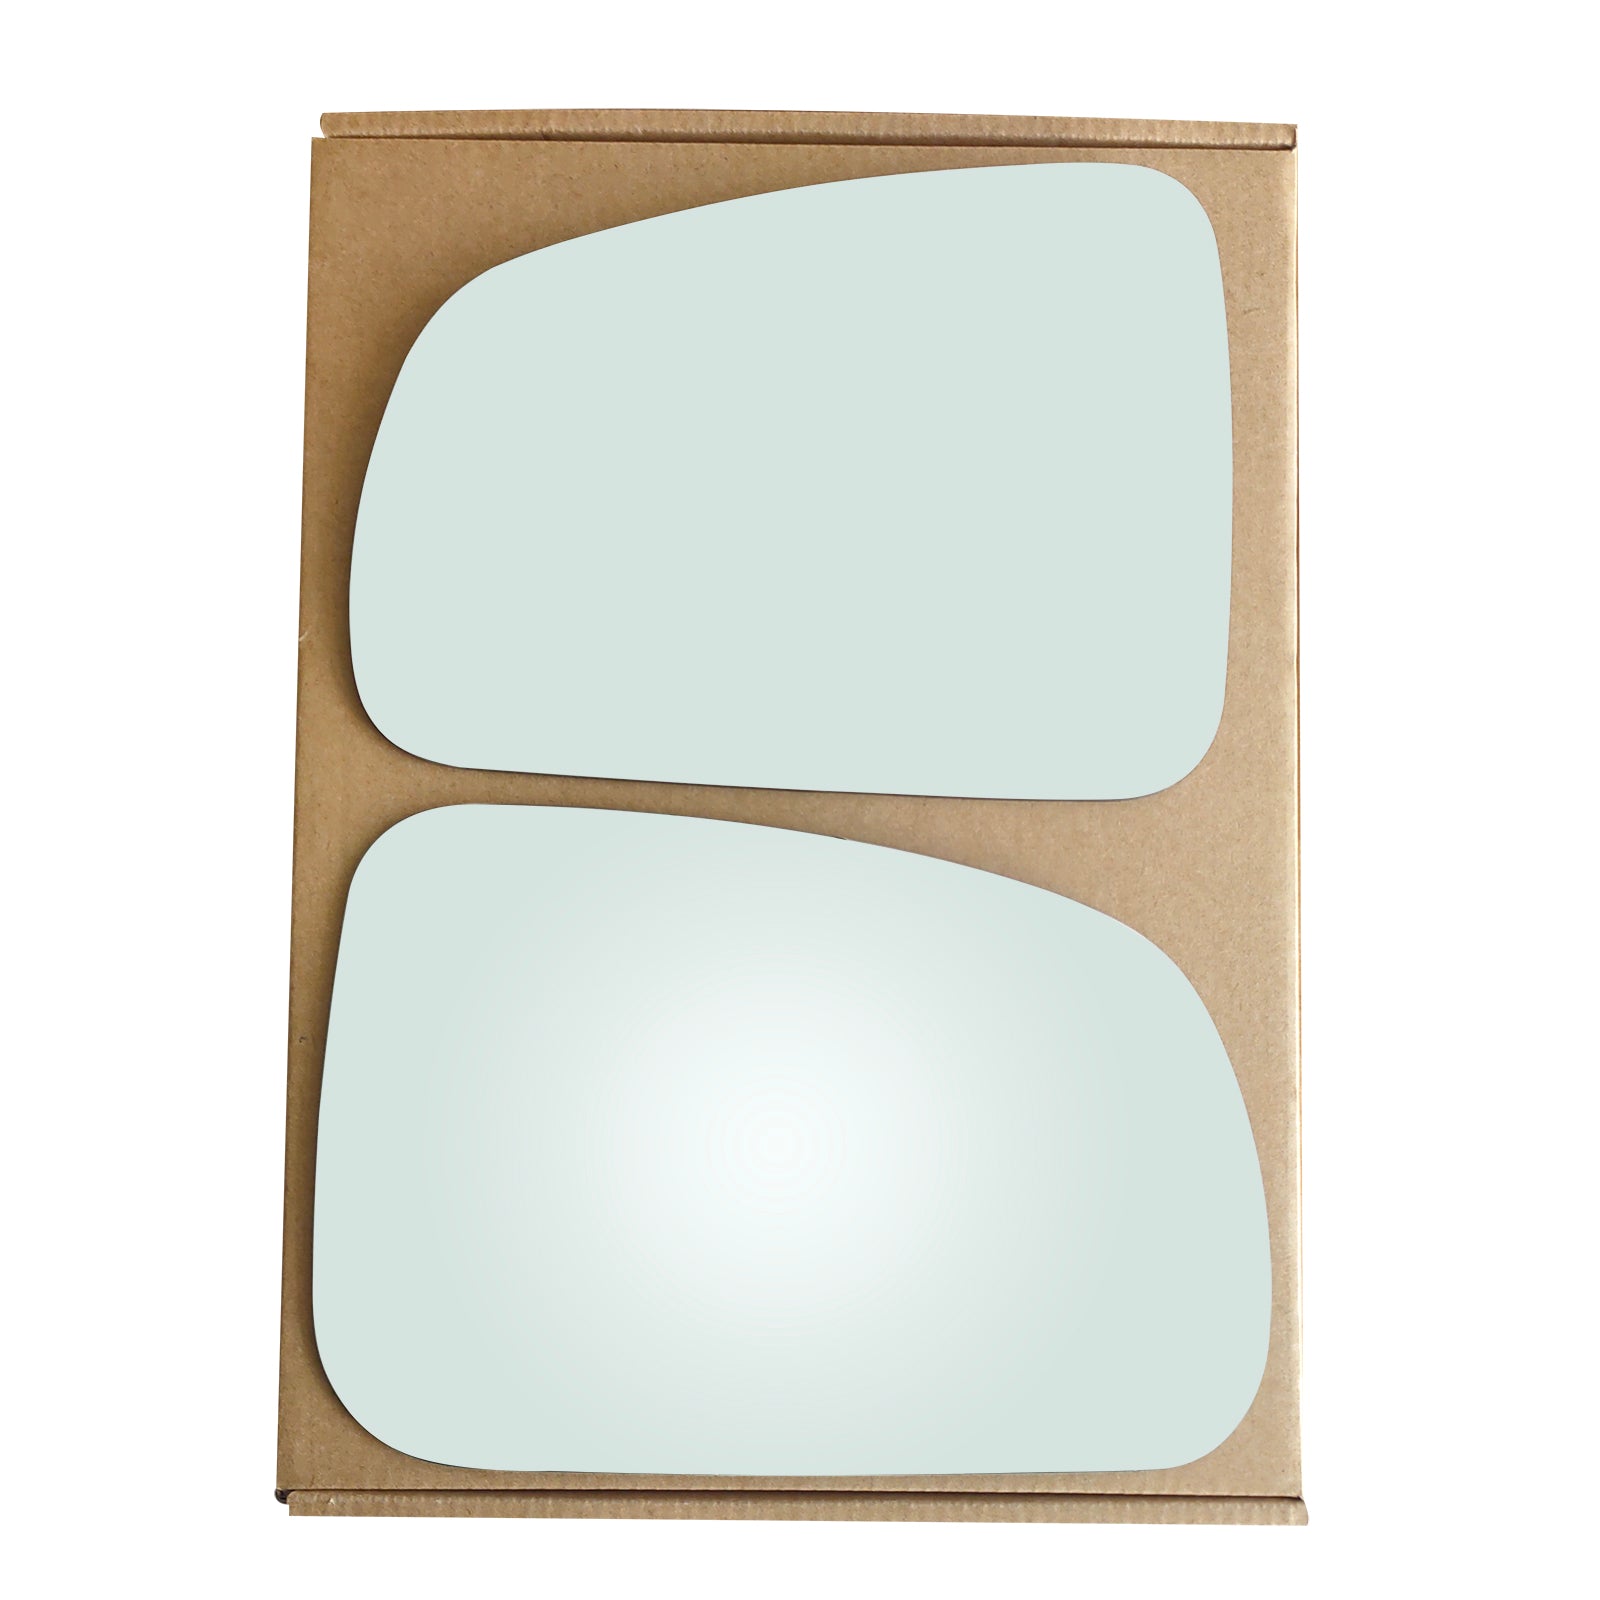 WLLW Replace Mirror Glass for 2004-2008 Pontiac Grand Prix, Driver Left Side LH/Passenger Right Side RH/The Both Sides Flat Convex M-0035